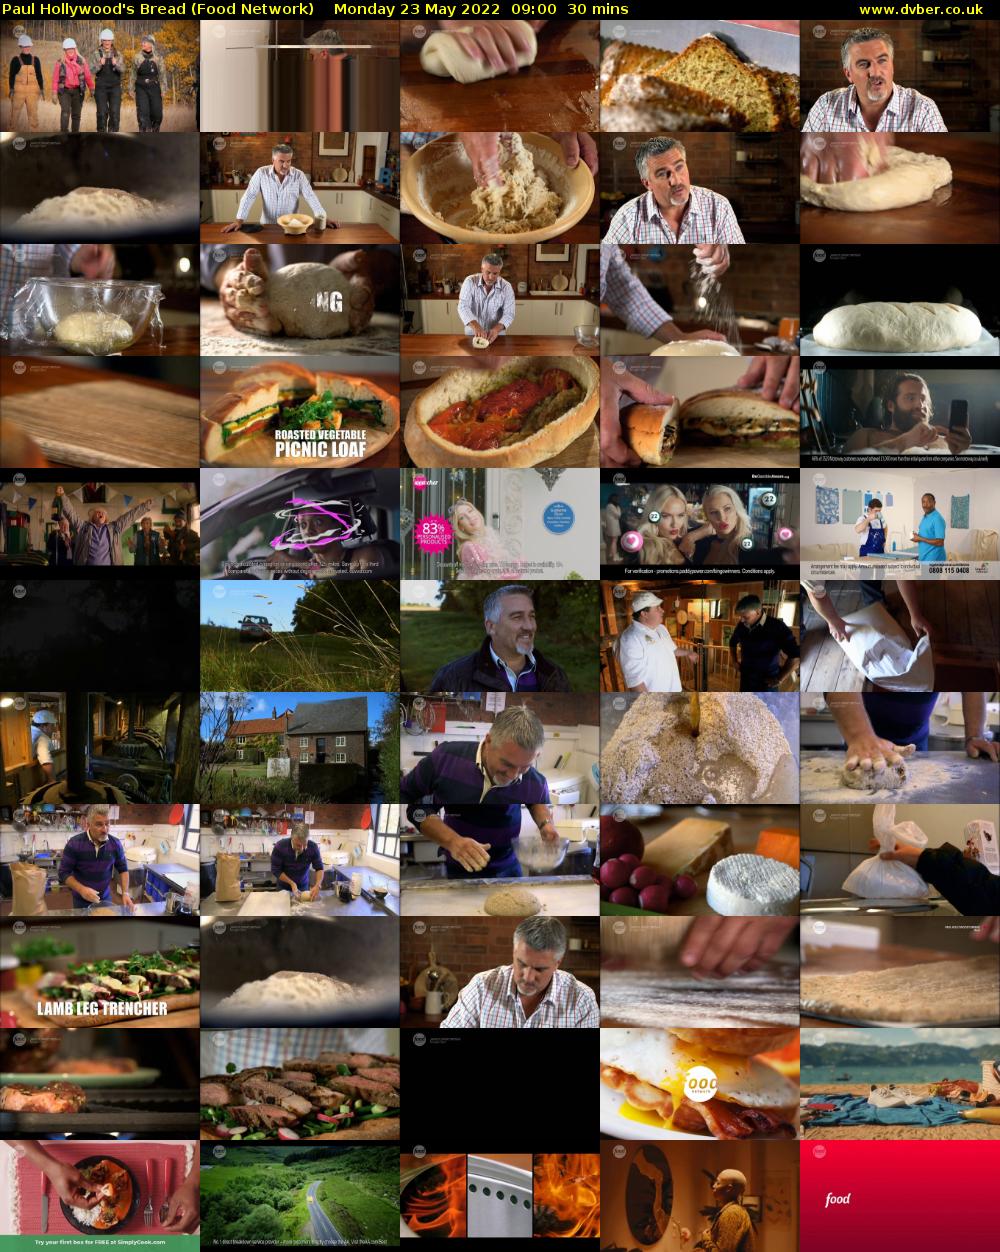 Paul Hollywood's Bread (Food Network) Monday 23 May 2022 09:00 - 09:30